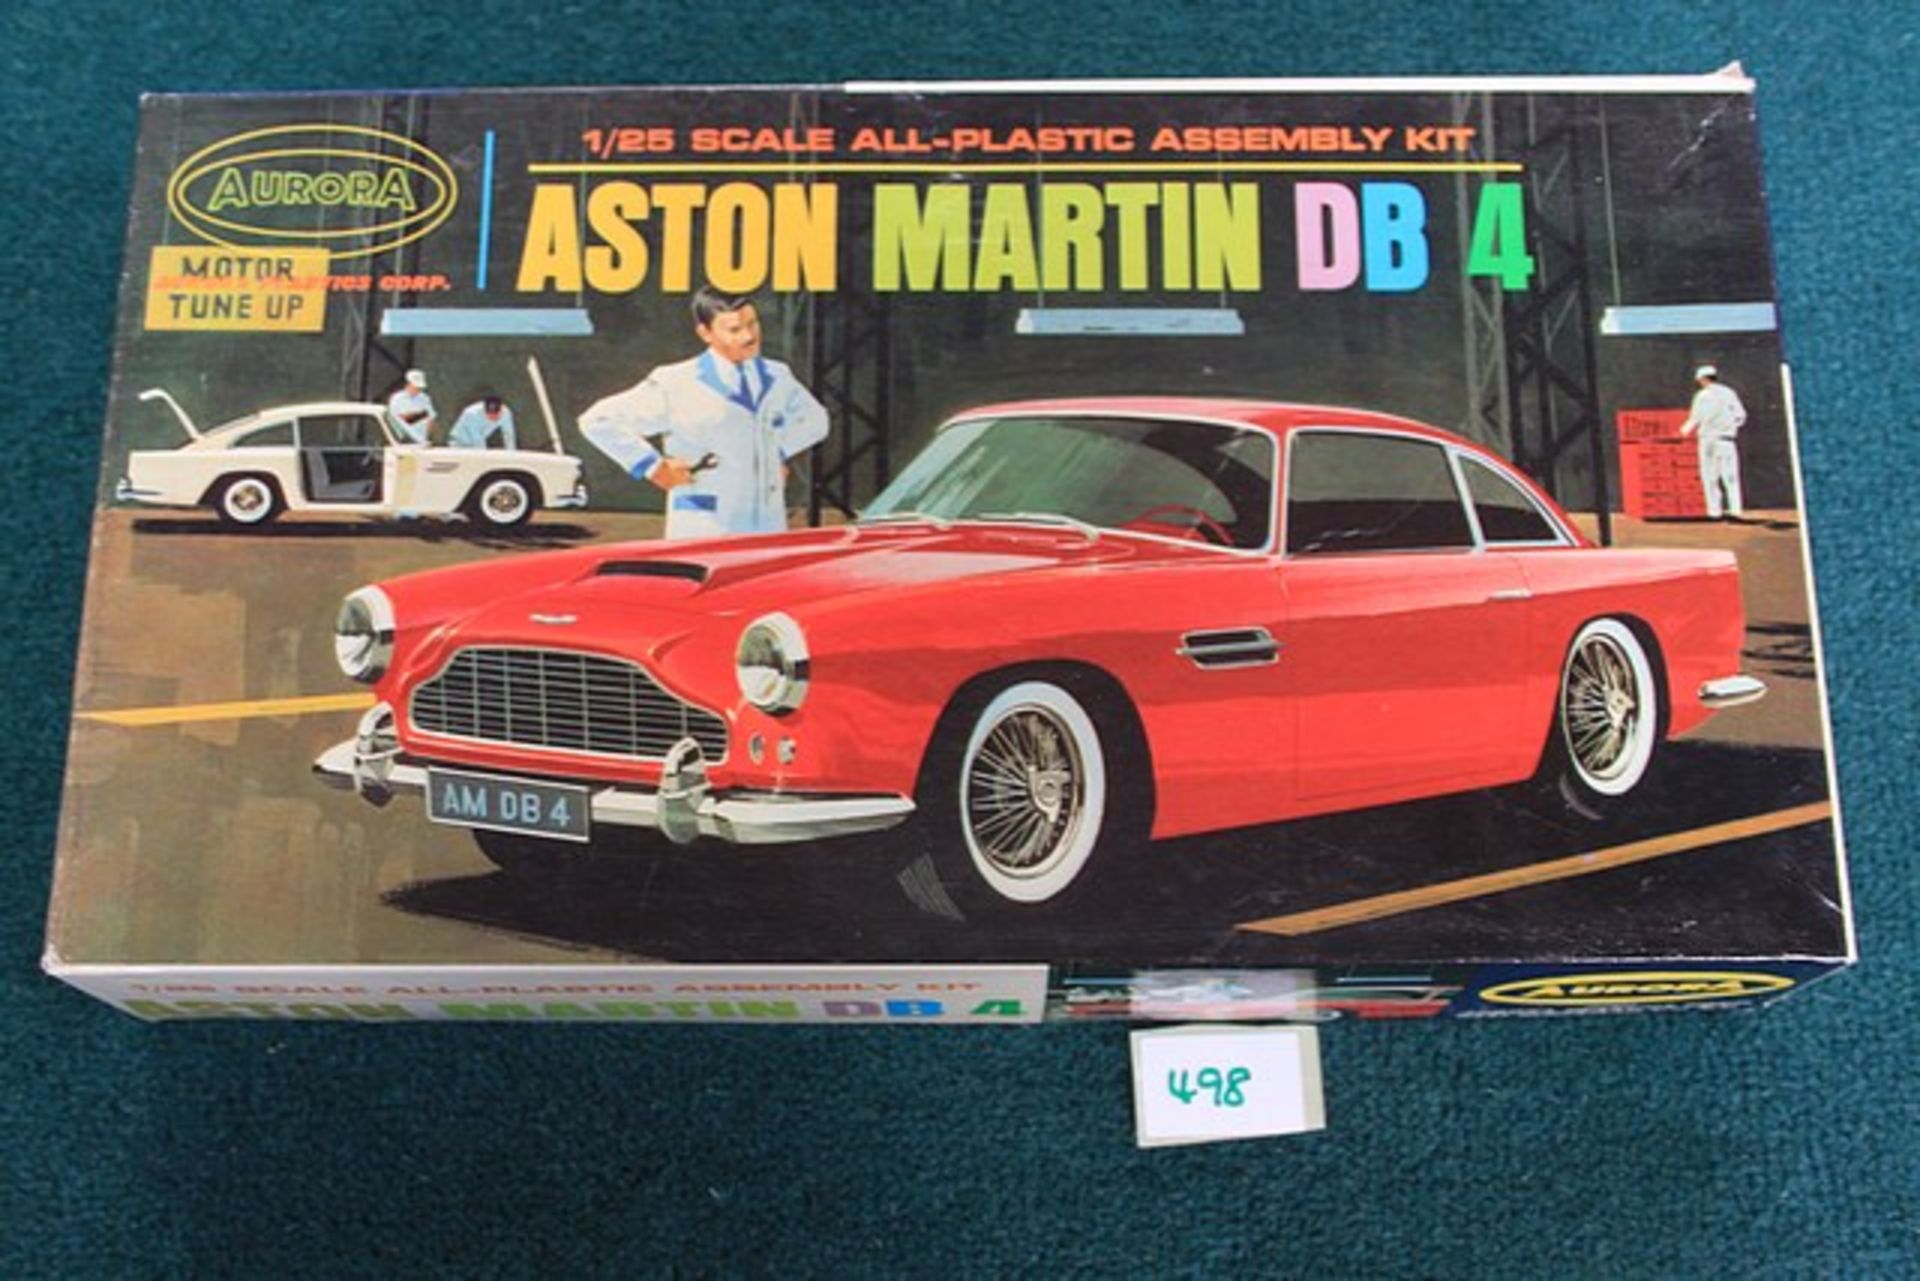 Aurora 1/25 Scale All-Plastic Assembly Kit Aston Martin DB 4 Complete In Box